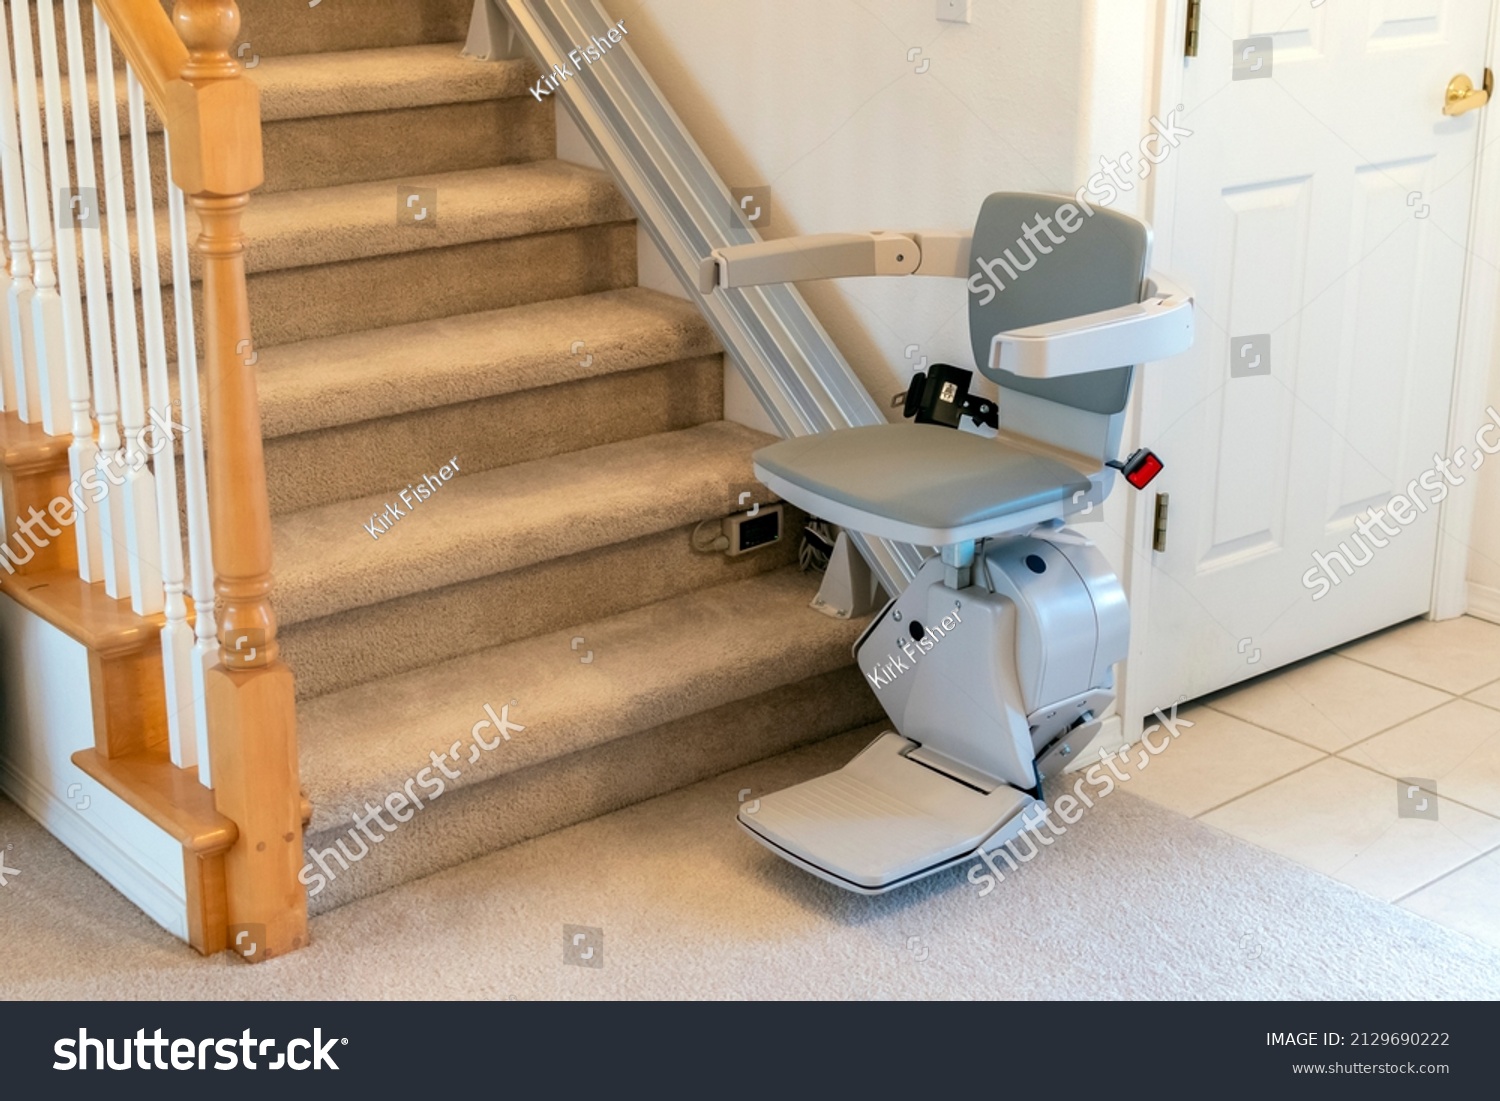 An electric, motorized chair lift for persons with disabilities on a carpeted staircase in a residential home. #2129690222